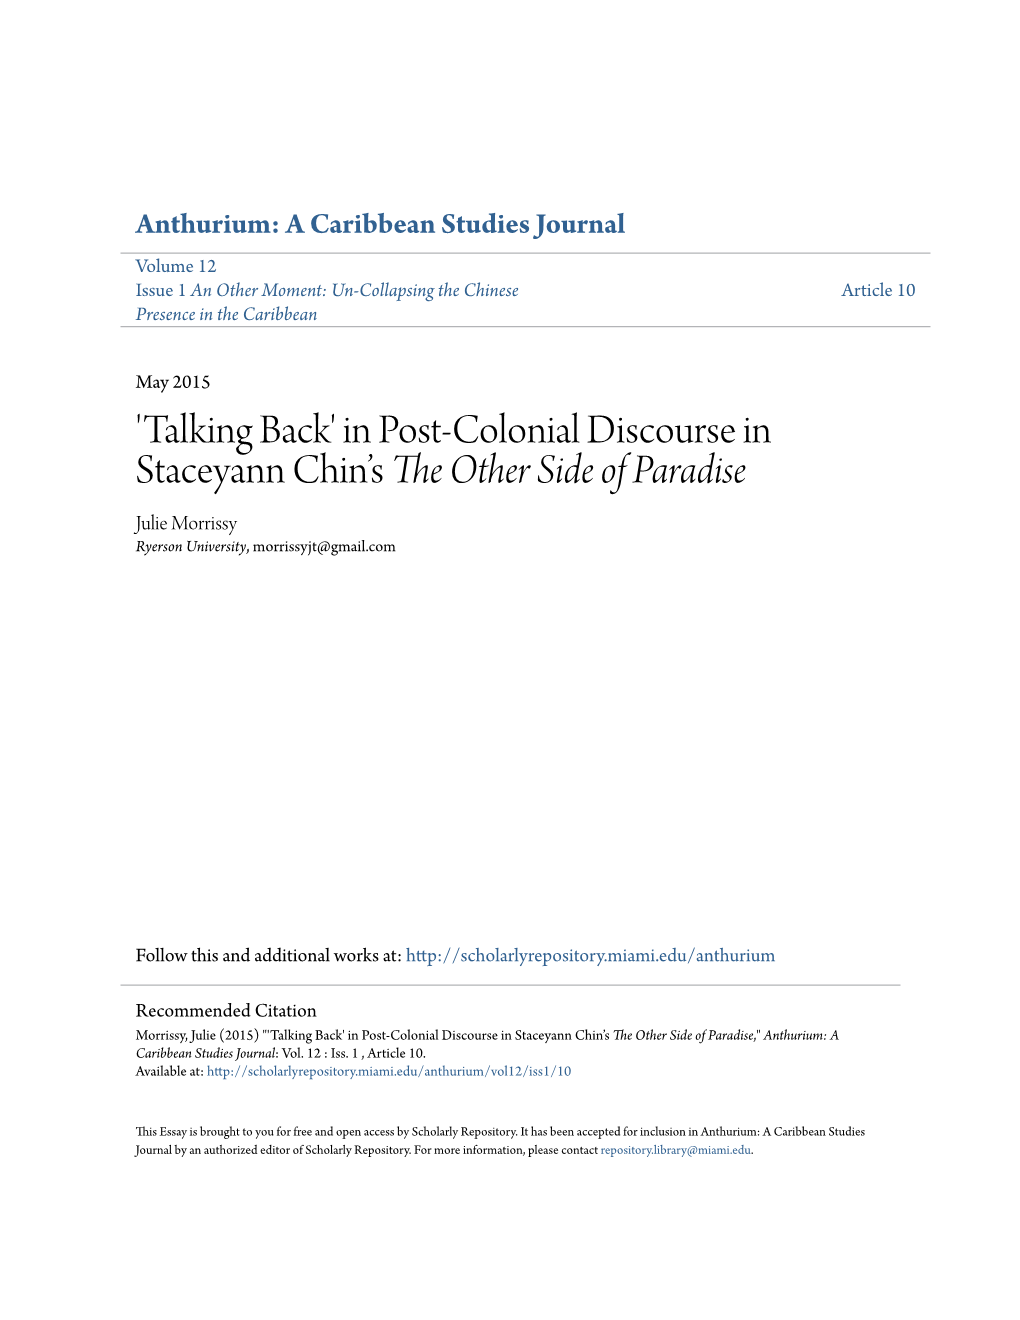 In Post-Colonial Discourse in Staceyann Chin's